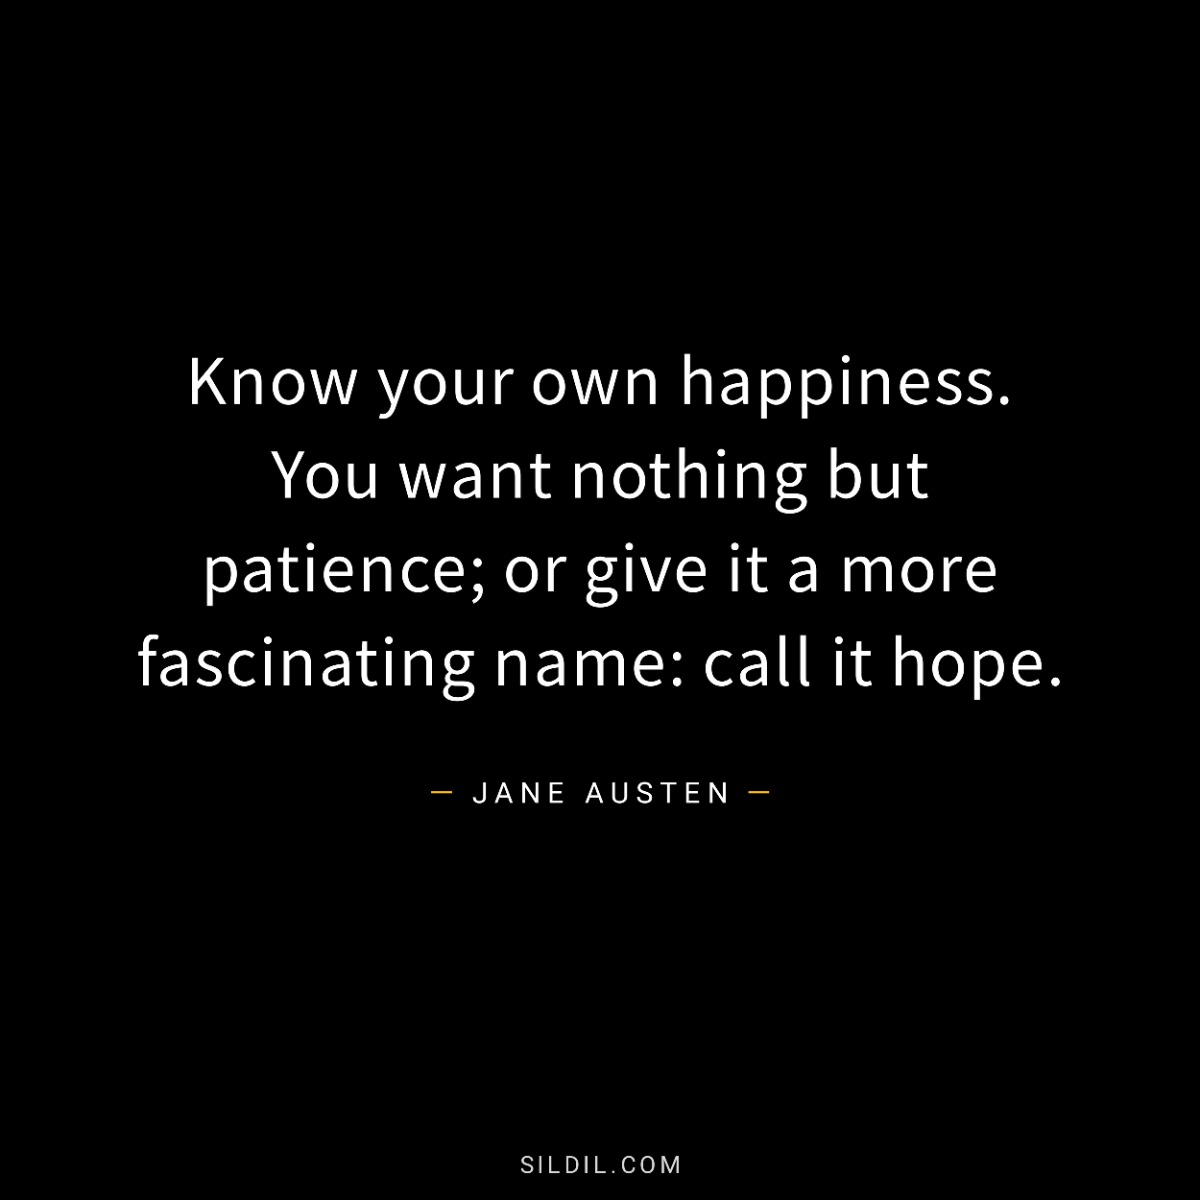 Know your own happiness. You want nothing but patience; or give it a more fascinating name: call it hope.